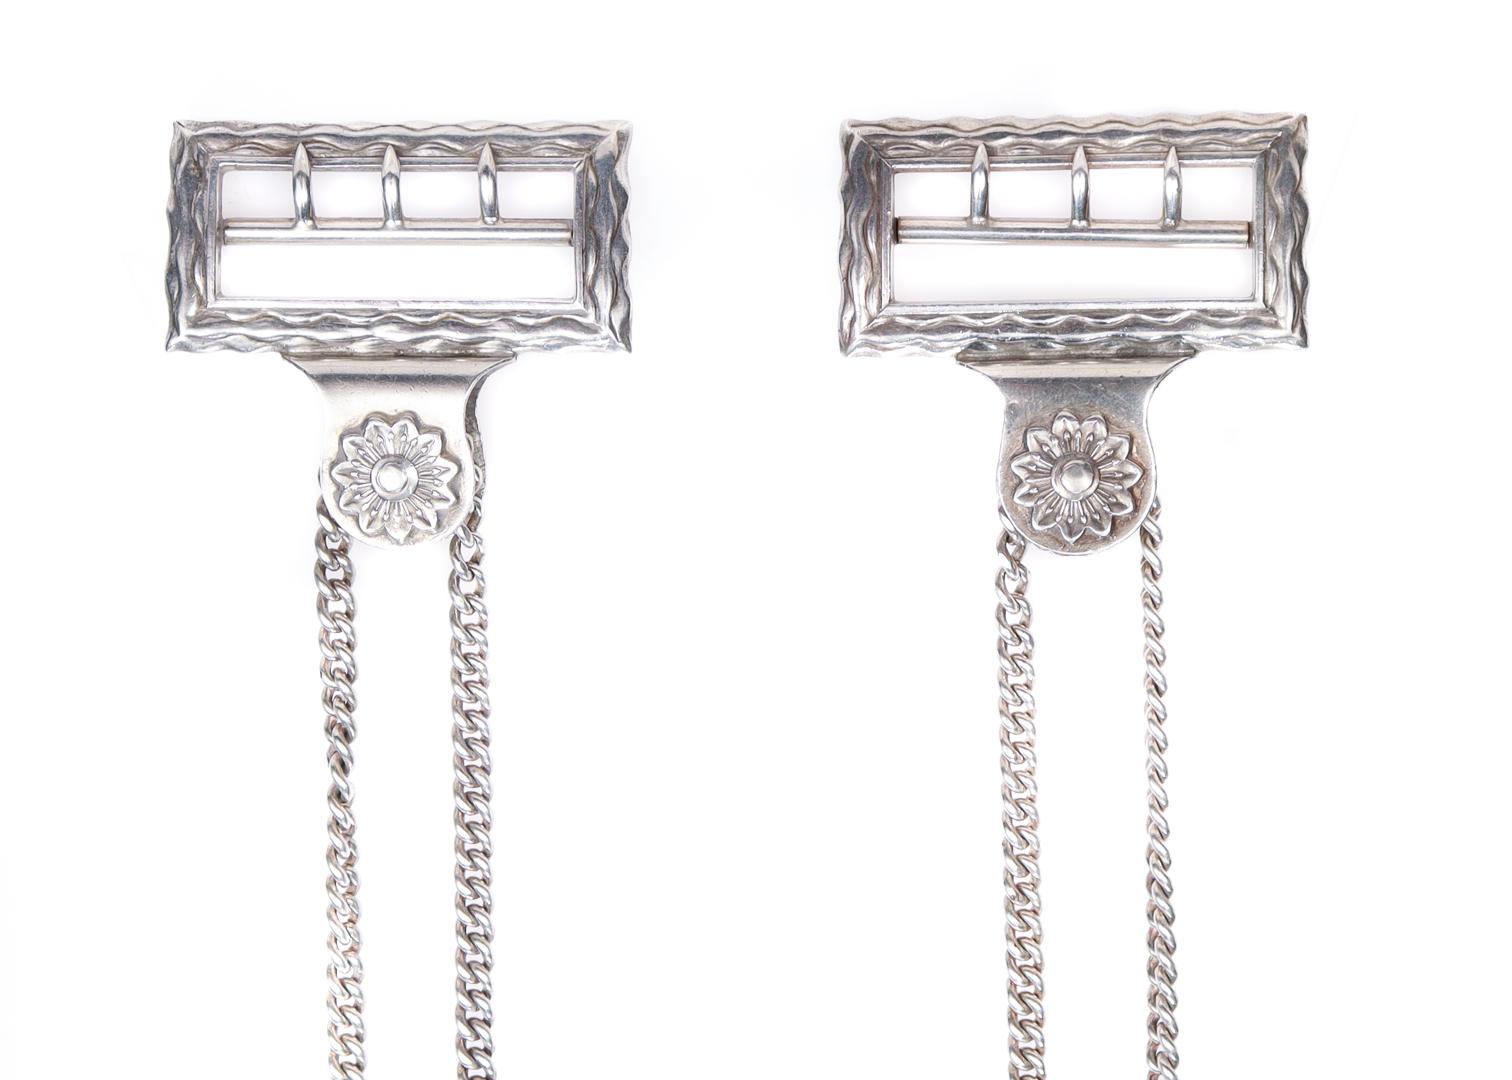 Antique 19th Century Gorham Sterling Silver Suspender Buckles In Good Condition For Sale In Philadelphia, PA